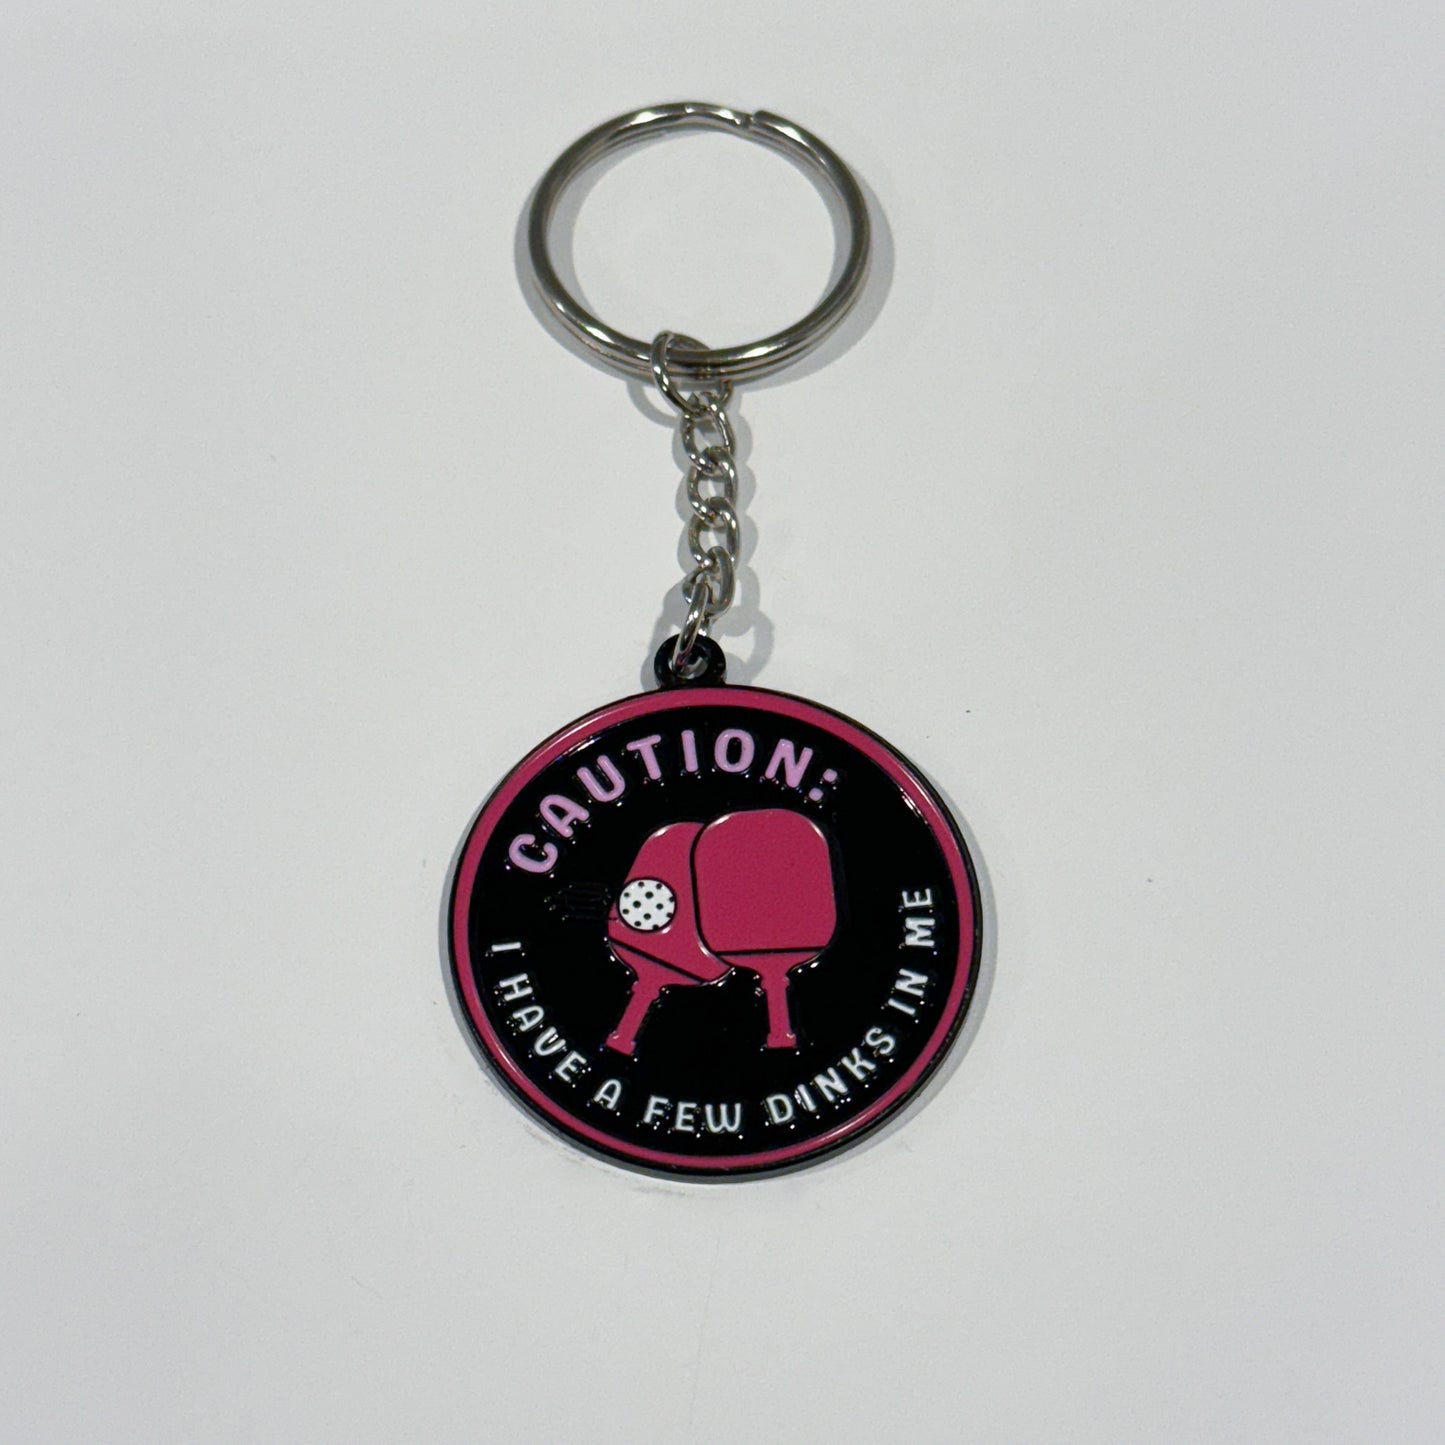 Pickeball "Caution: I Have A Few Dinks In Me" - Pickleballer Keychain/Pin